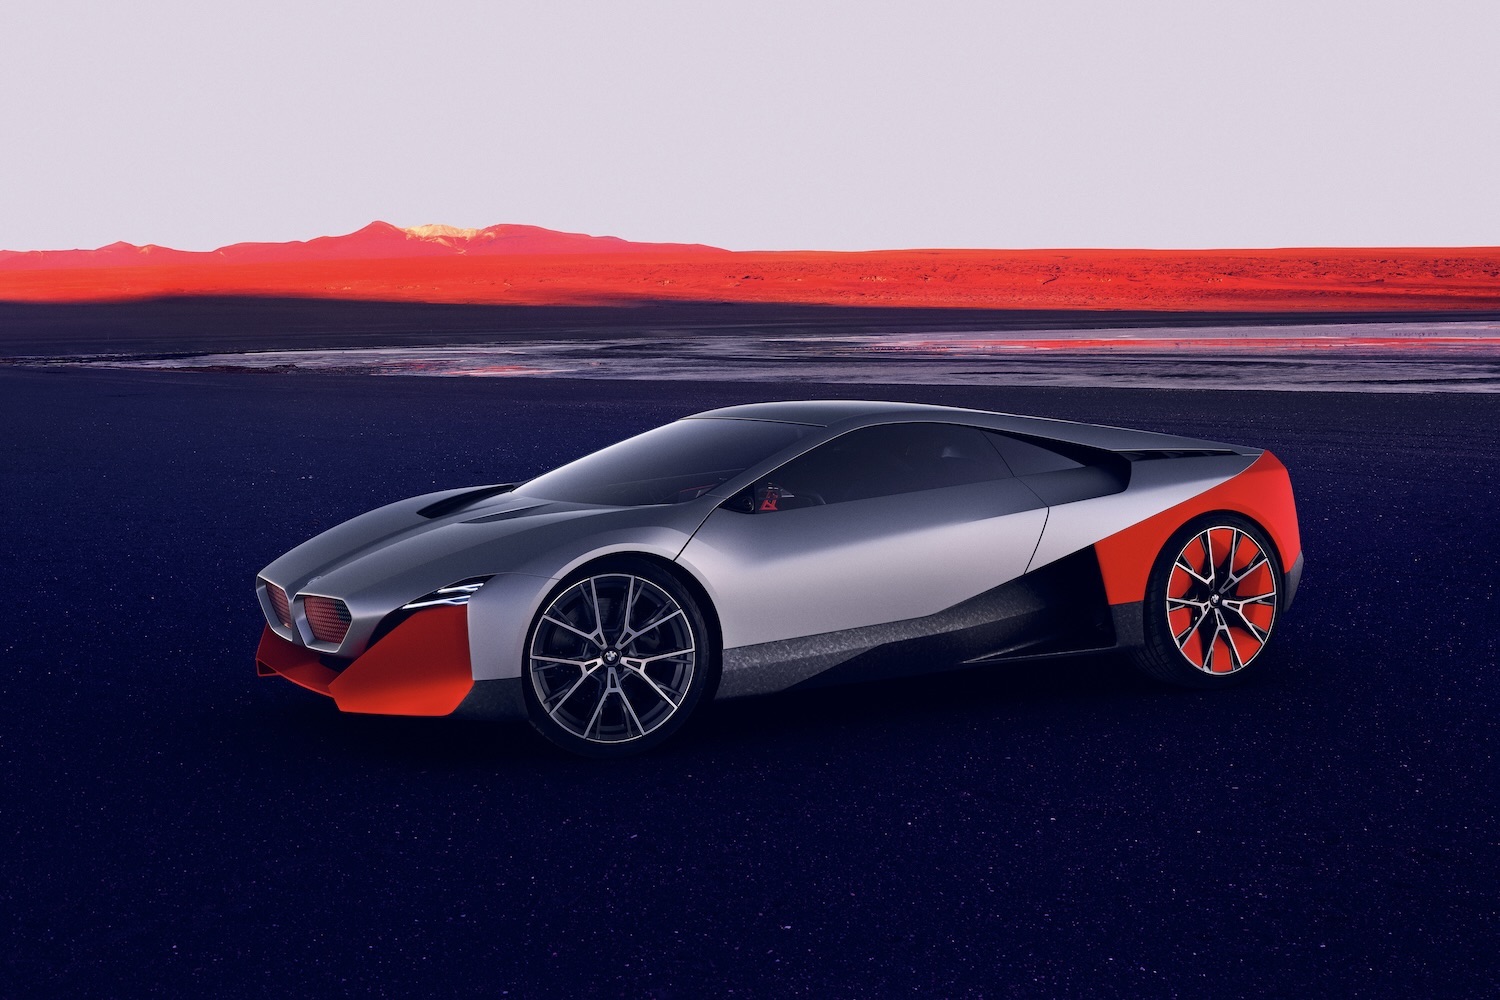 BMW M Vision NEXT Concept front end angle from driver's side in front of red mountains.